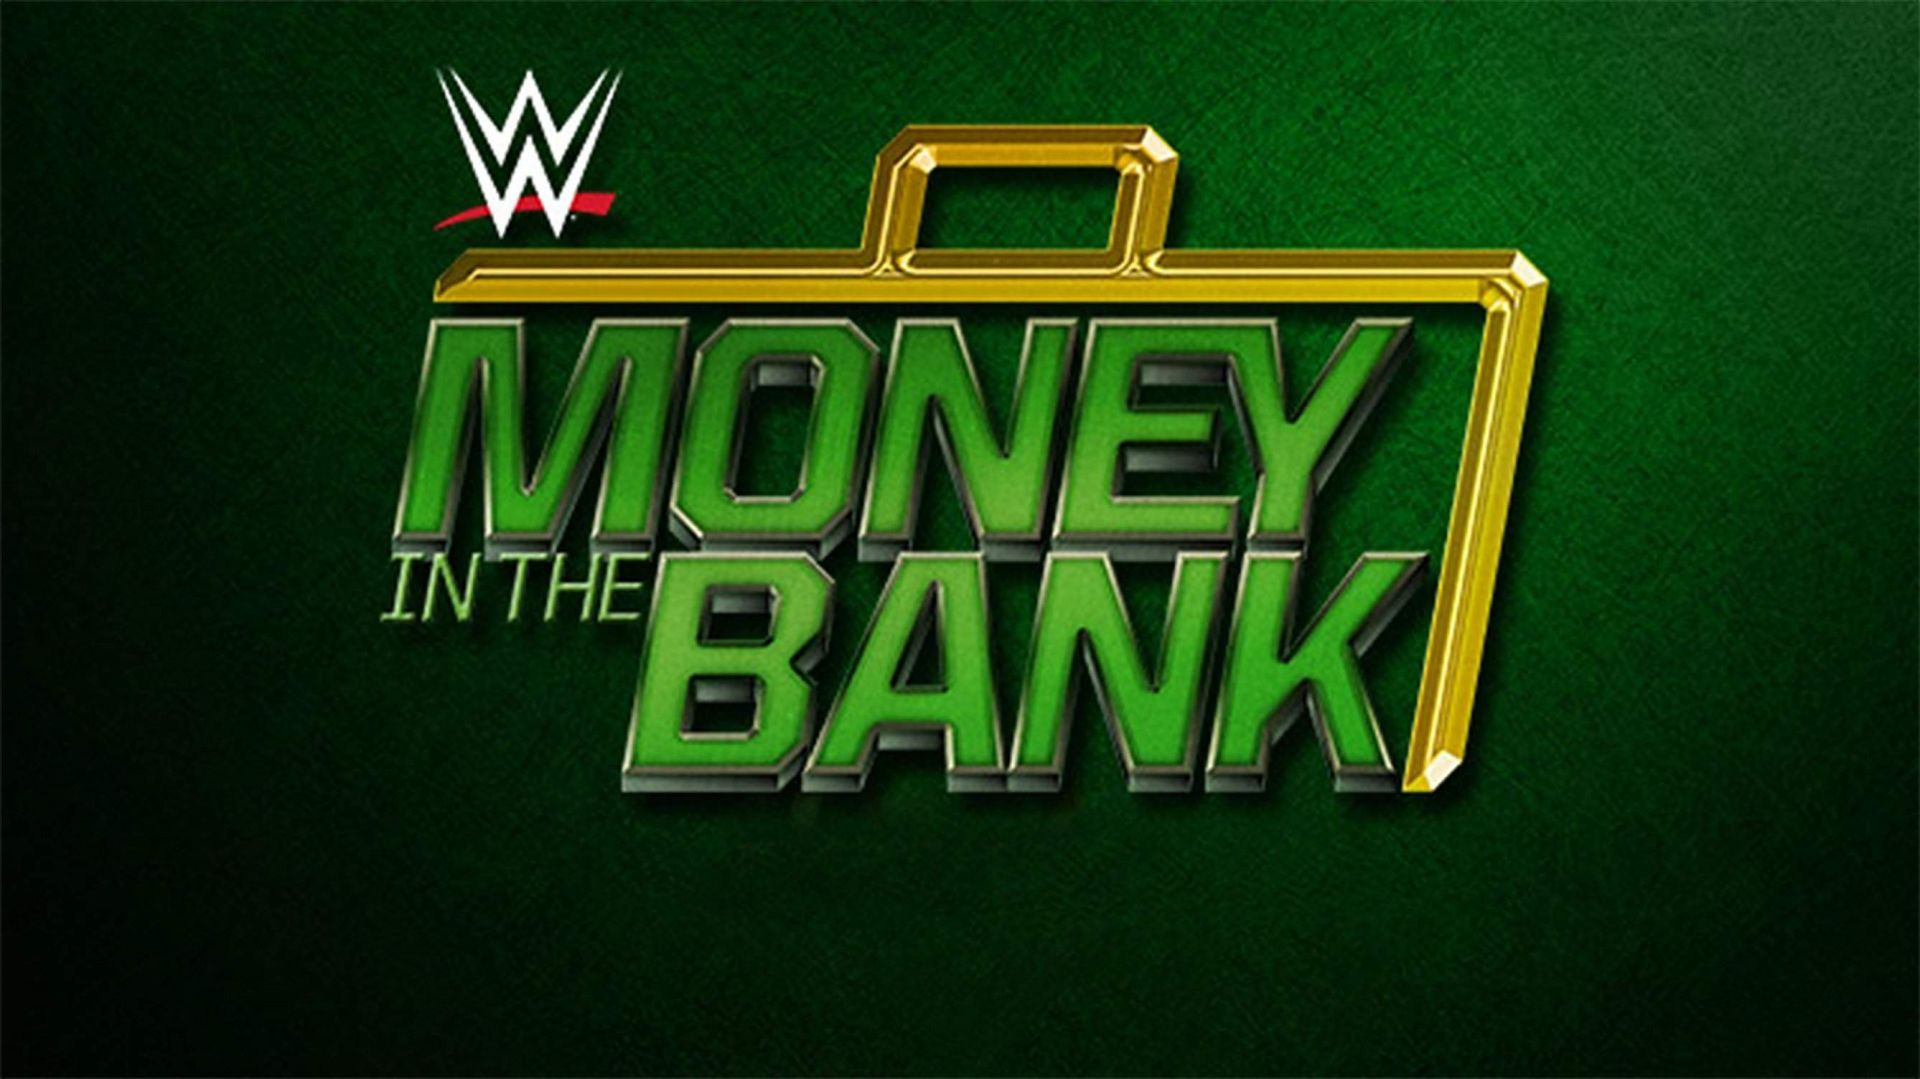 Money in the Bank takes place on July 2